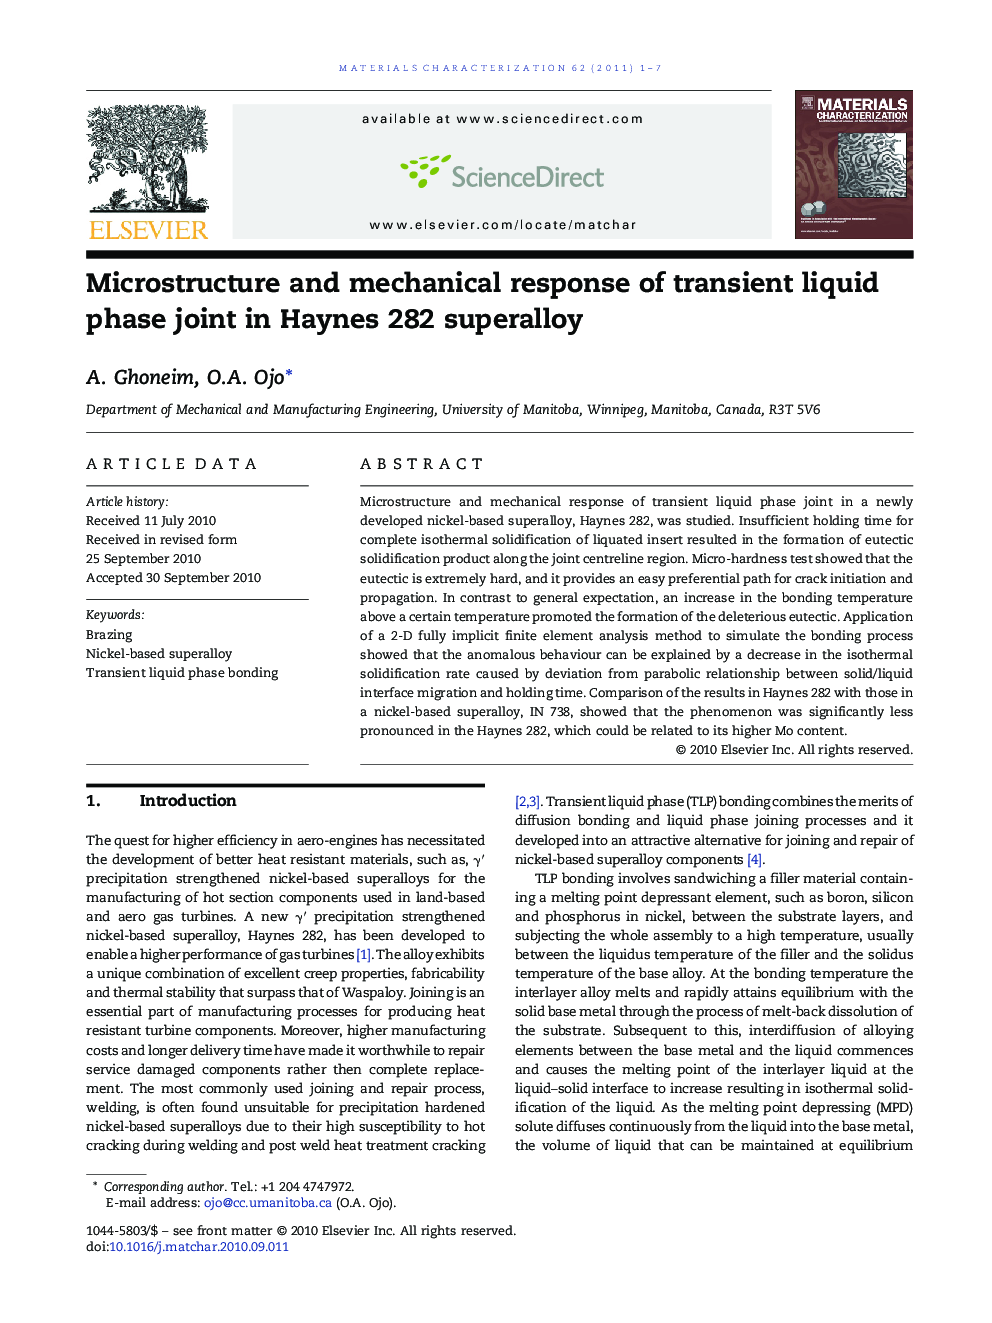 Microstructure and mechanical response of transient liquid phase joint in Haynes 282 superalloy